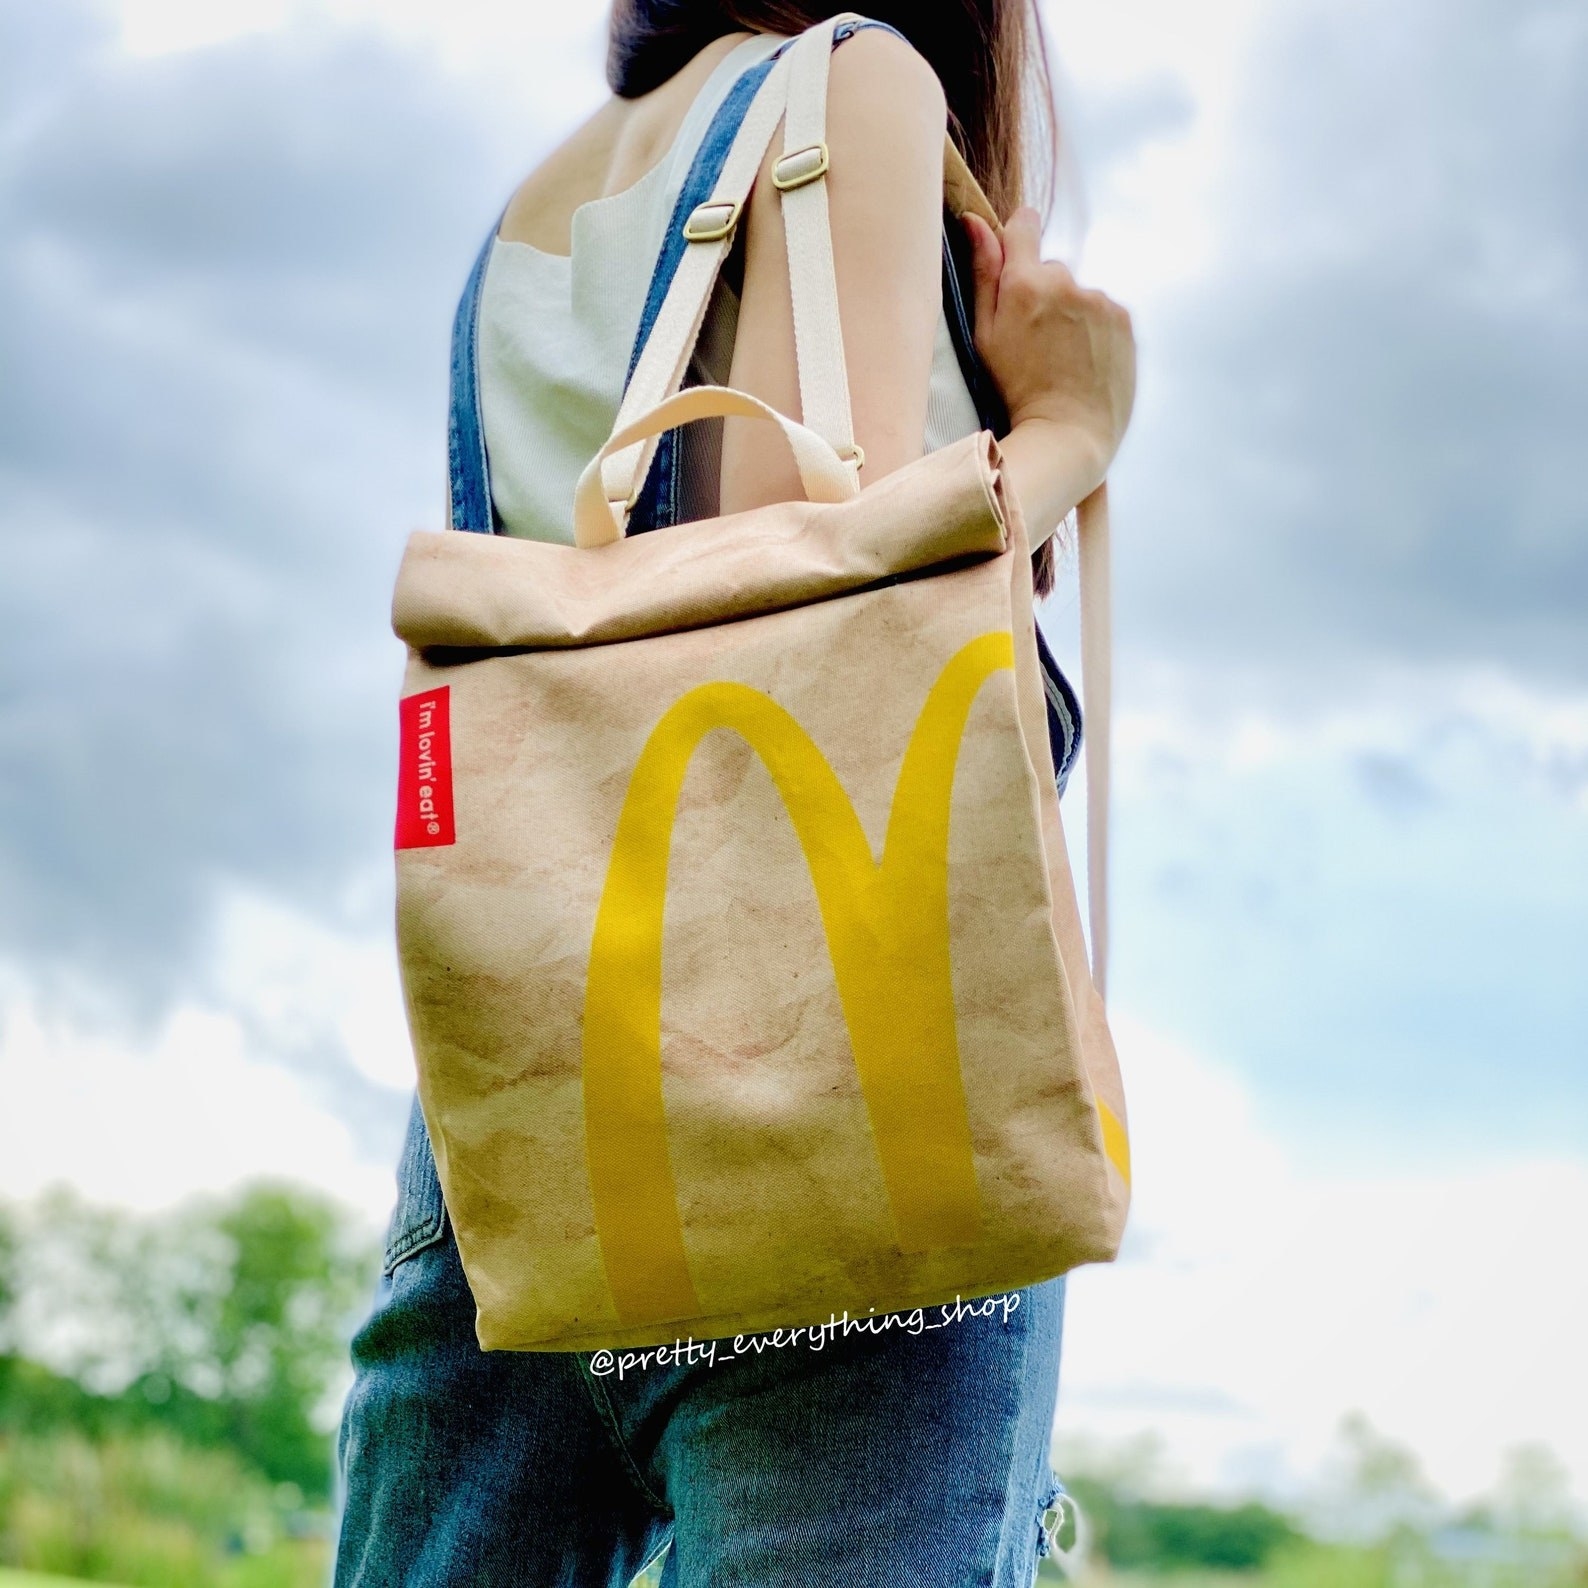 A model carrying the McDonald's backpack